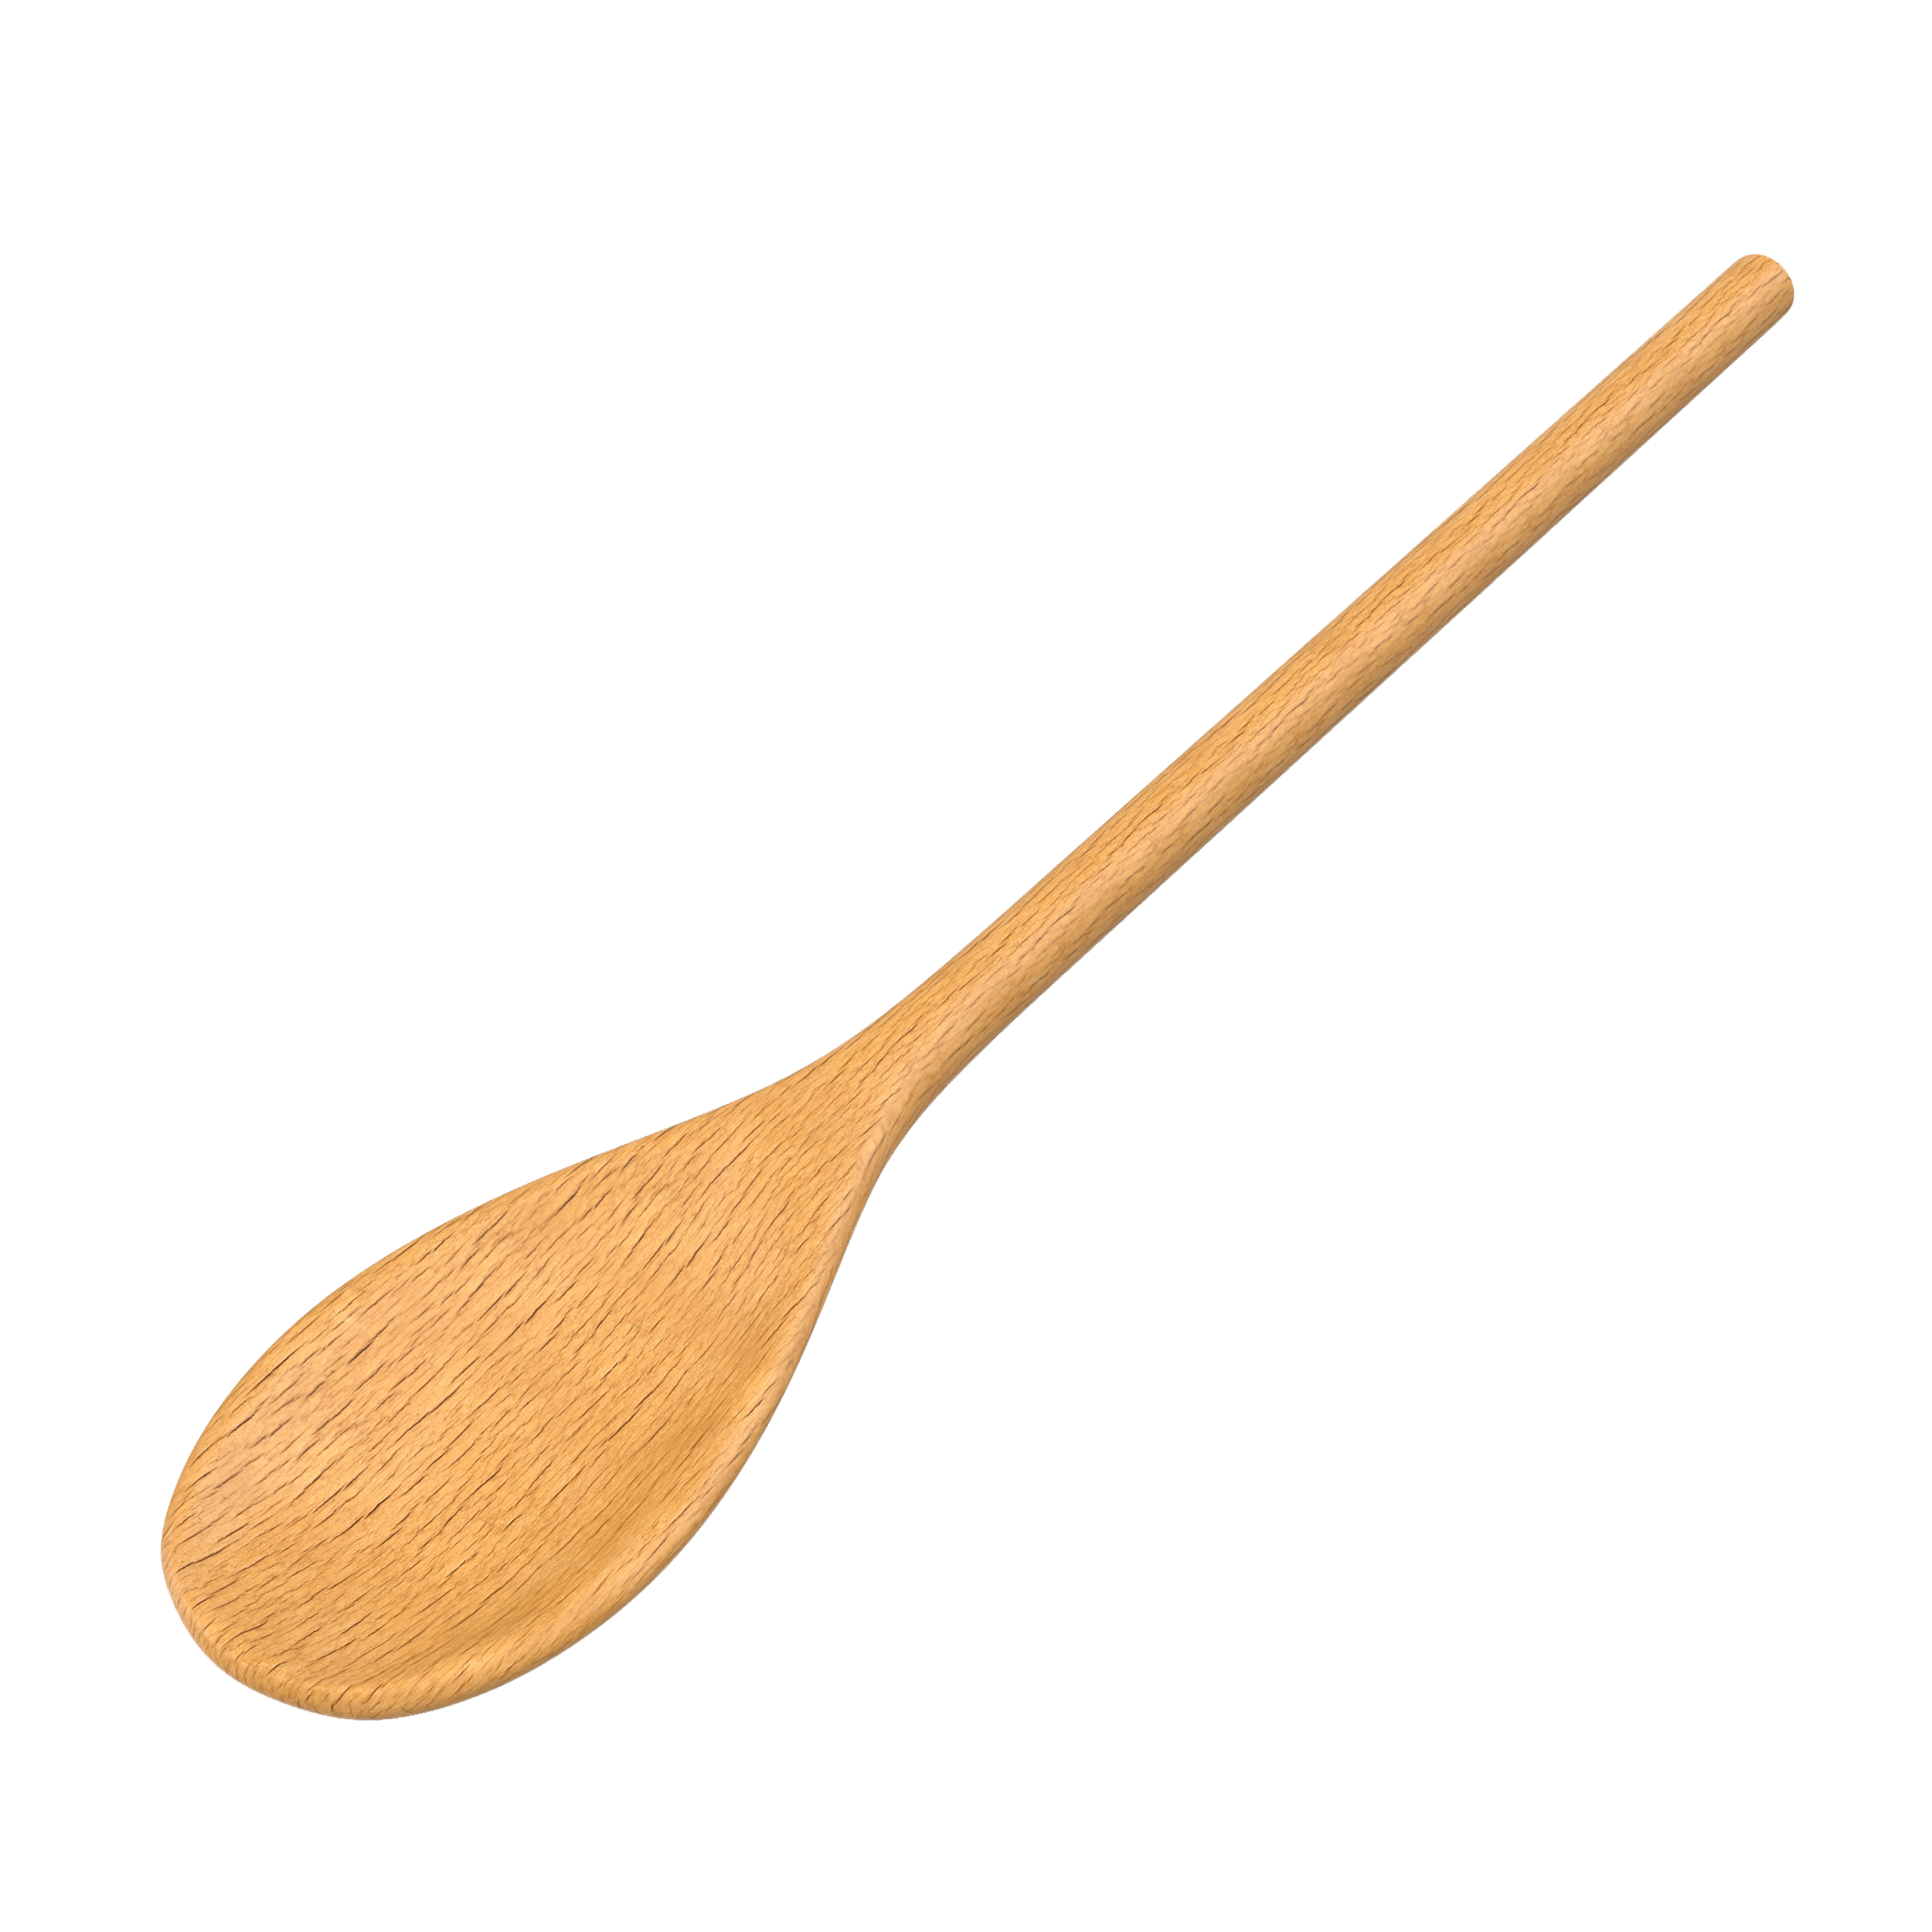 Wooden Spatula Png